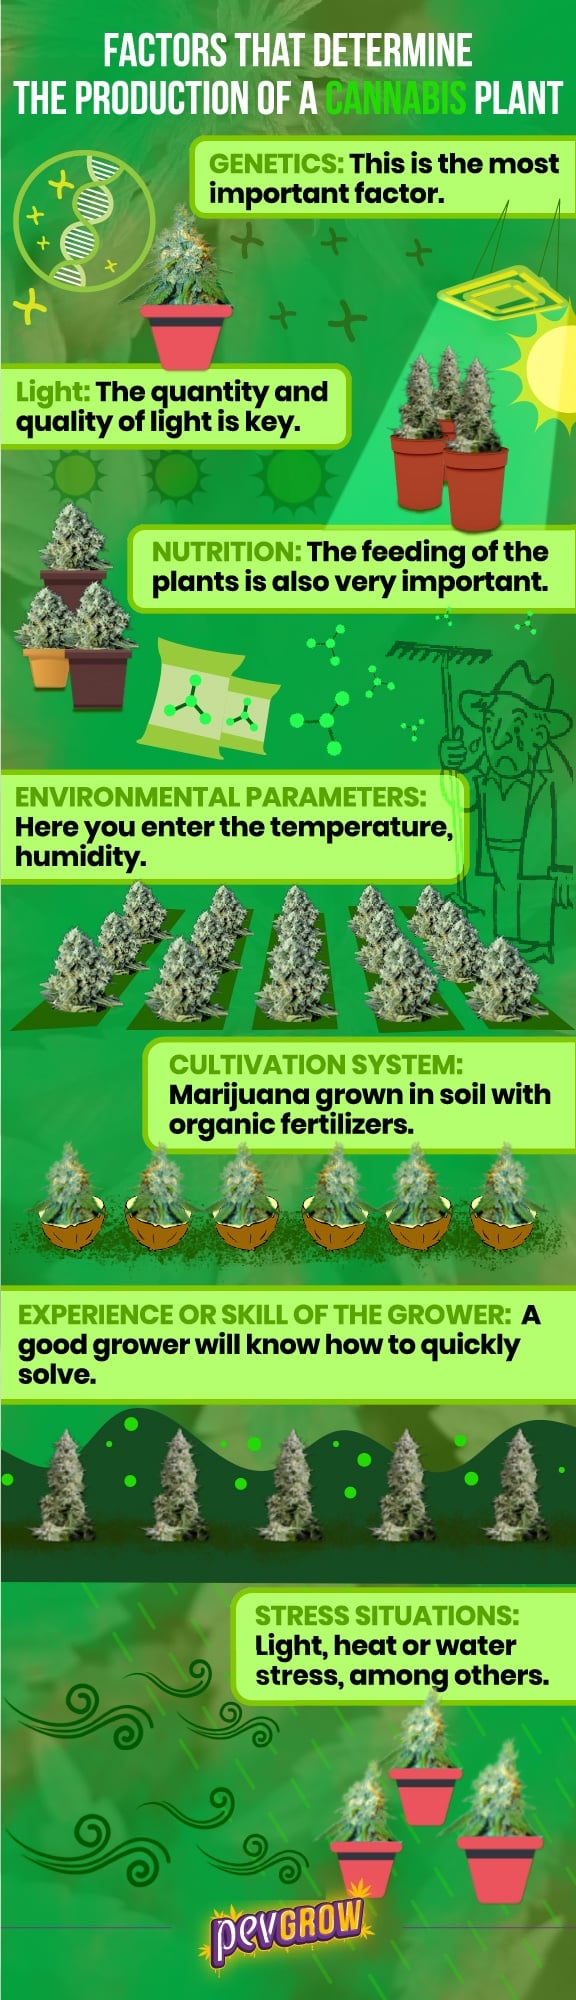 Factors determining the production of a cannabis plant in pictures